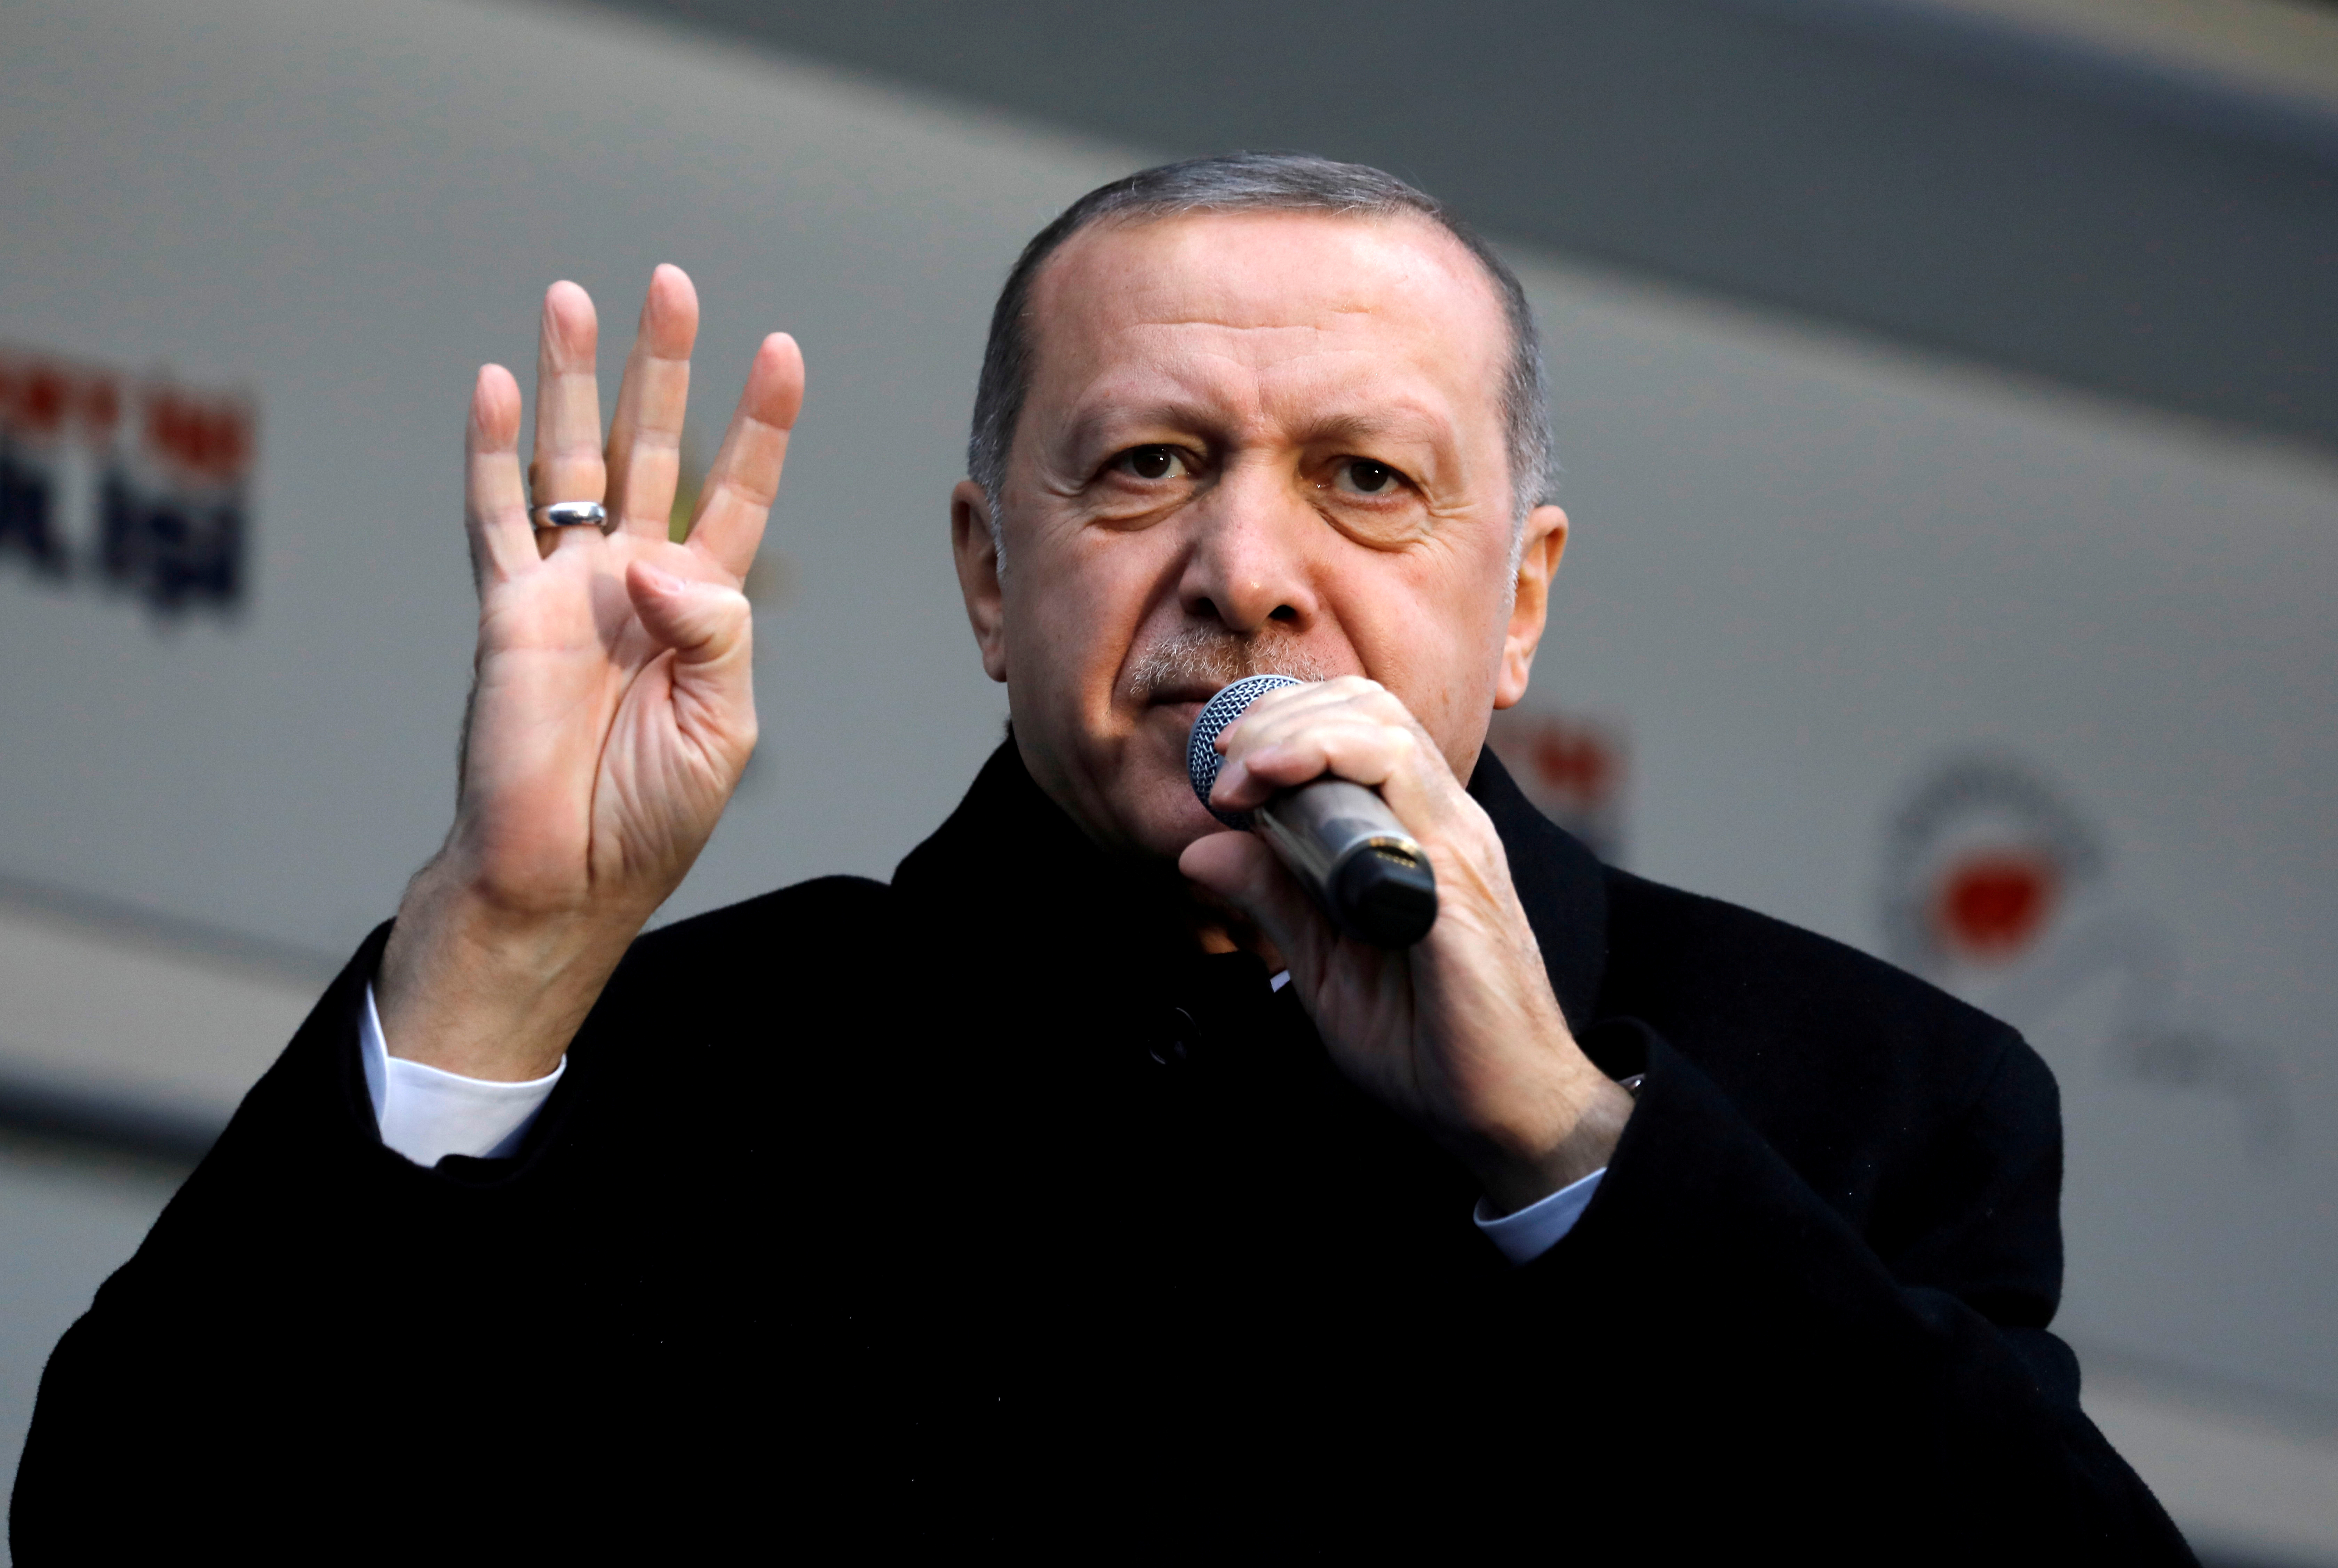 Turkish President Tayyip Erdogan addresses his supporters during a rally for the upcoming local elections in Istanbul, Turkey, February 16, 2019. REUTERS/Umit Bektas/File Photo